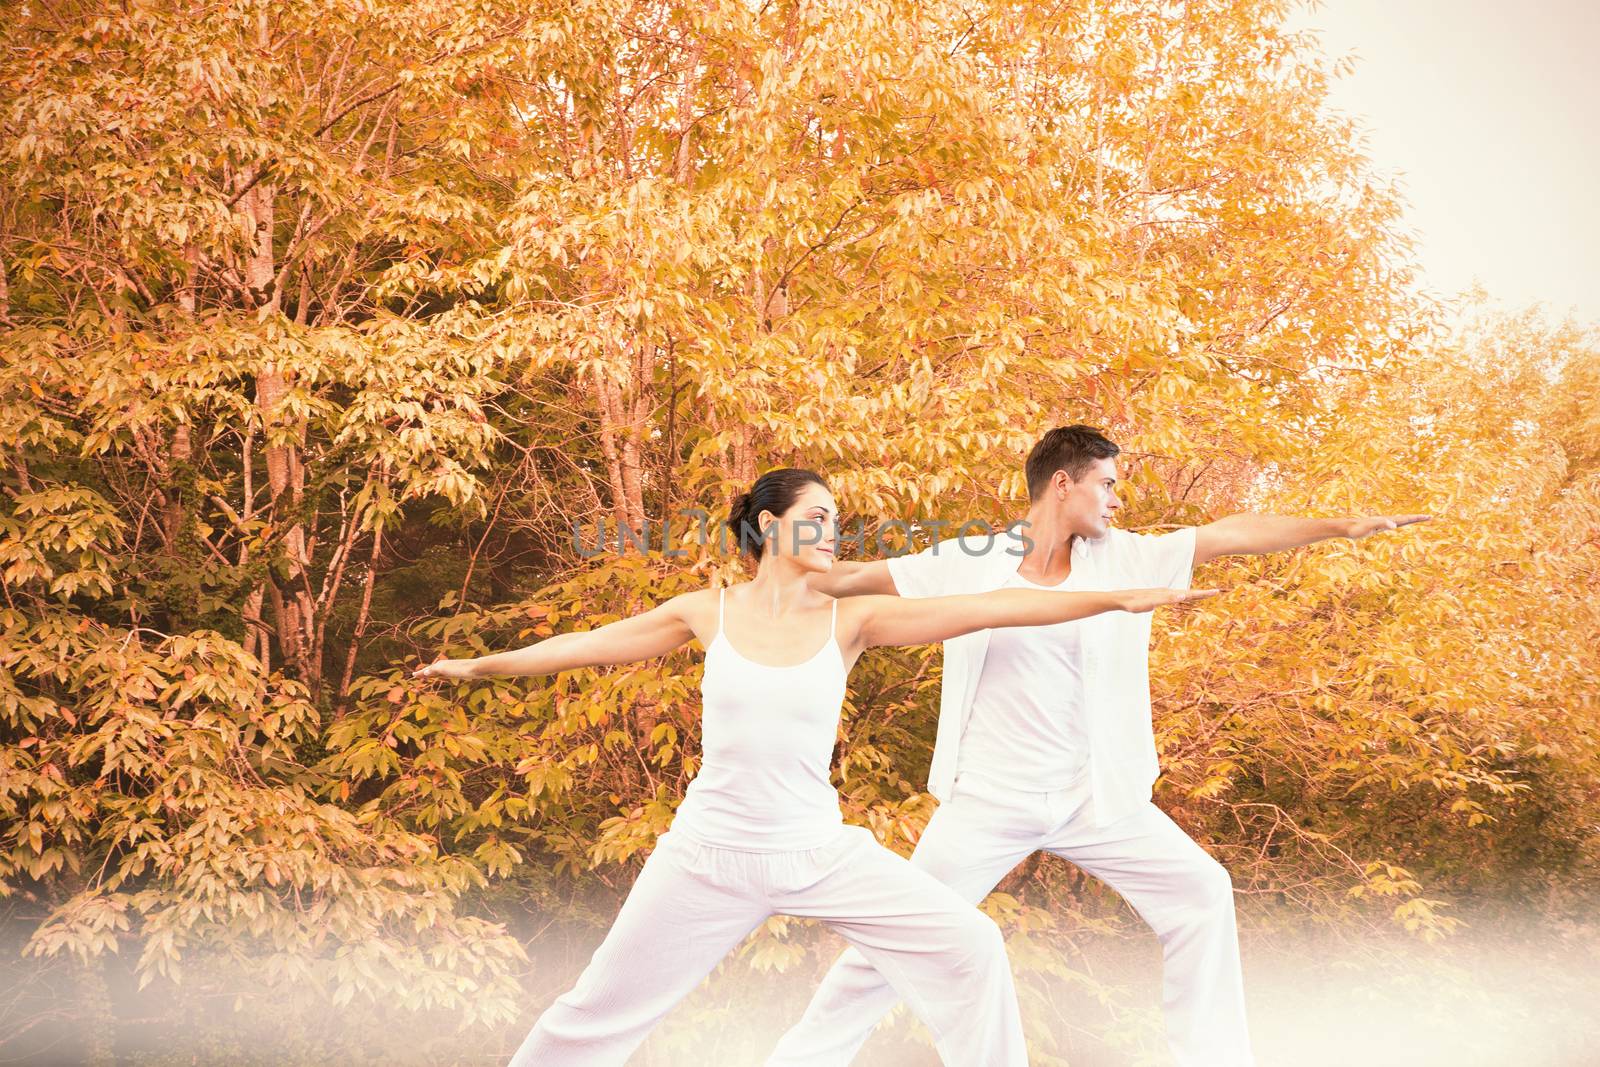 Composite image of peaceful couple in white doing yoga together in warrior position by Wavebreakmedia